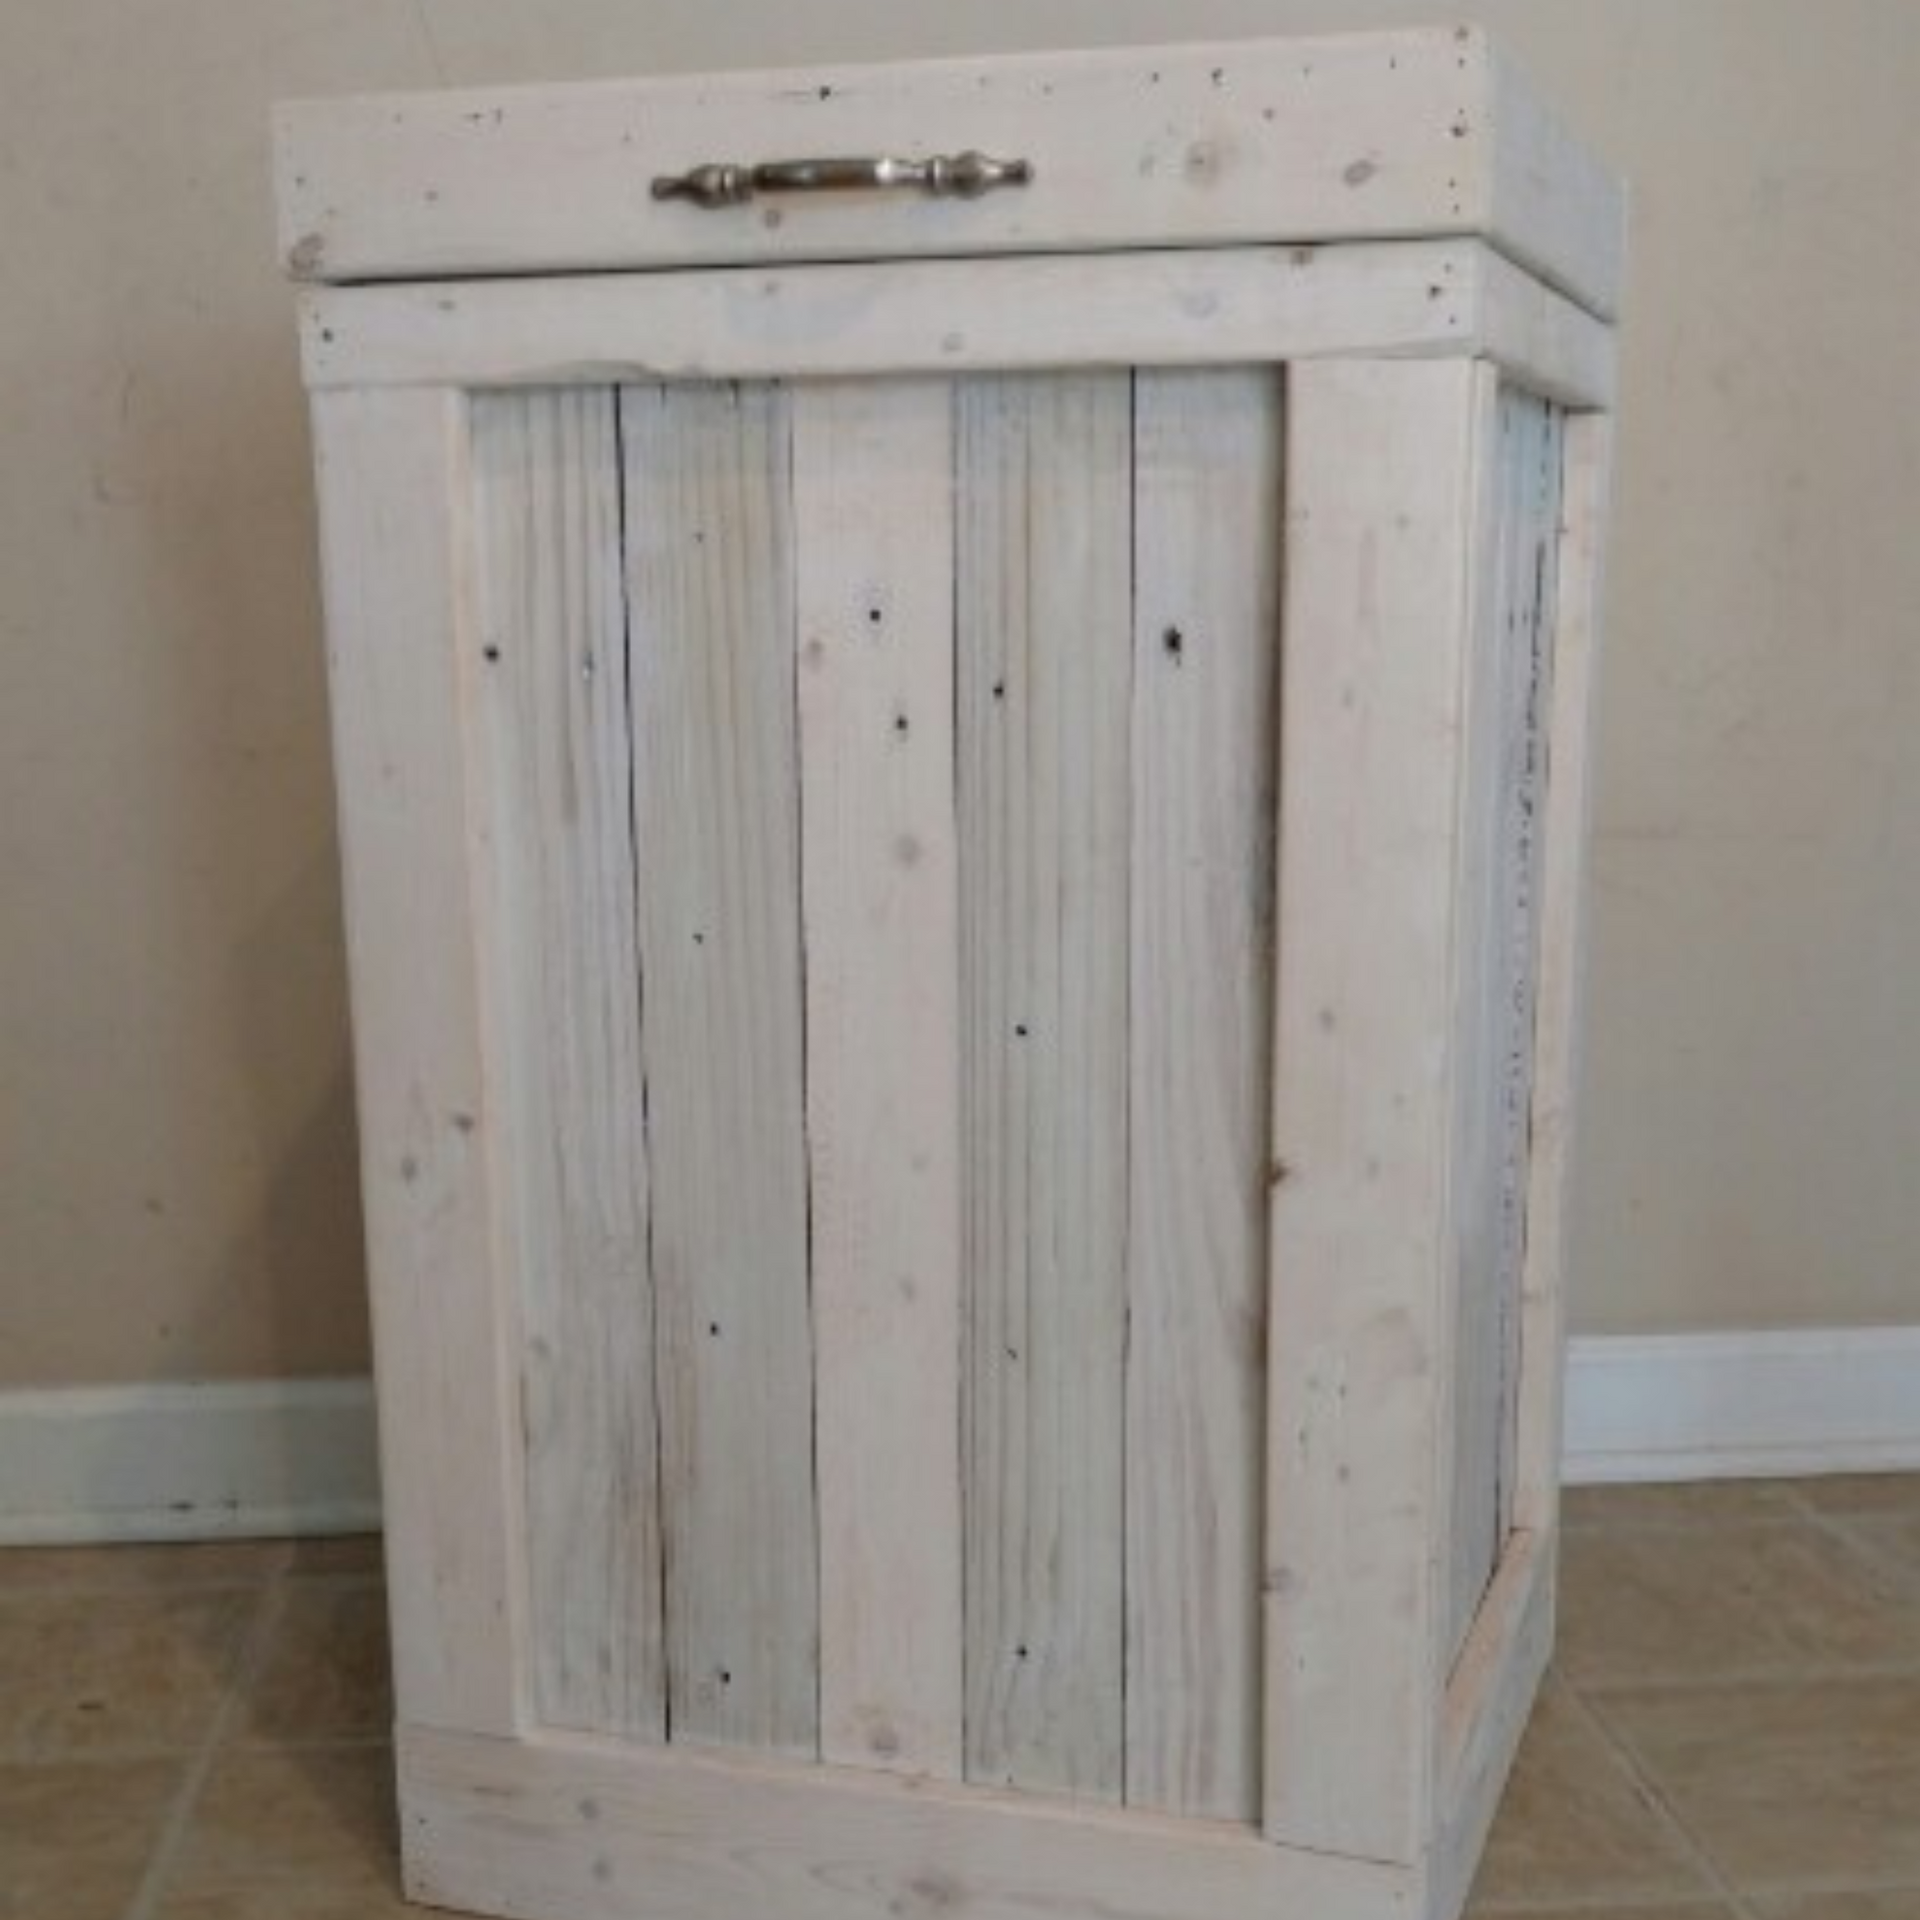 Rustic Wood 30 Gallon Large Kitchen Trash Can 